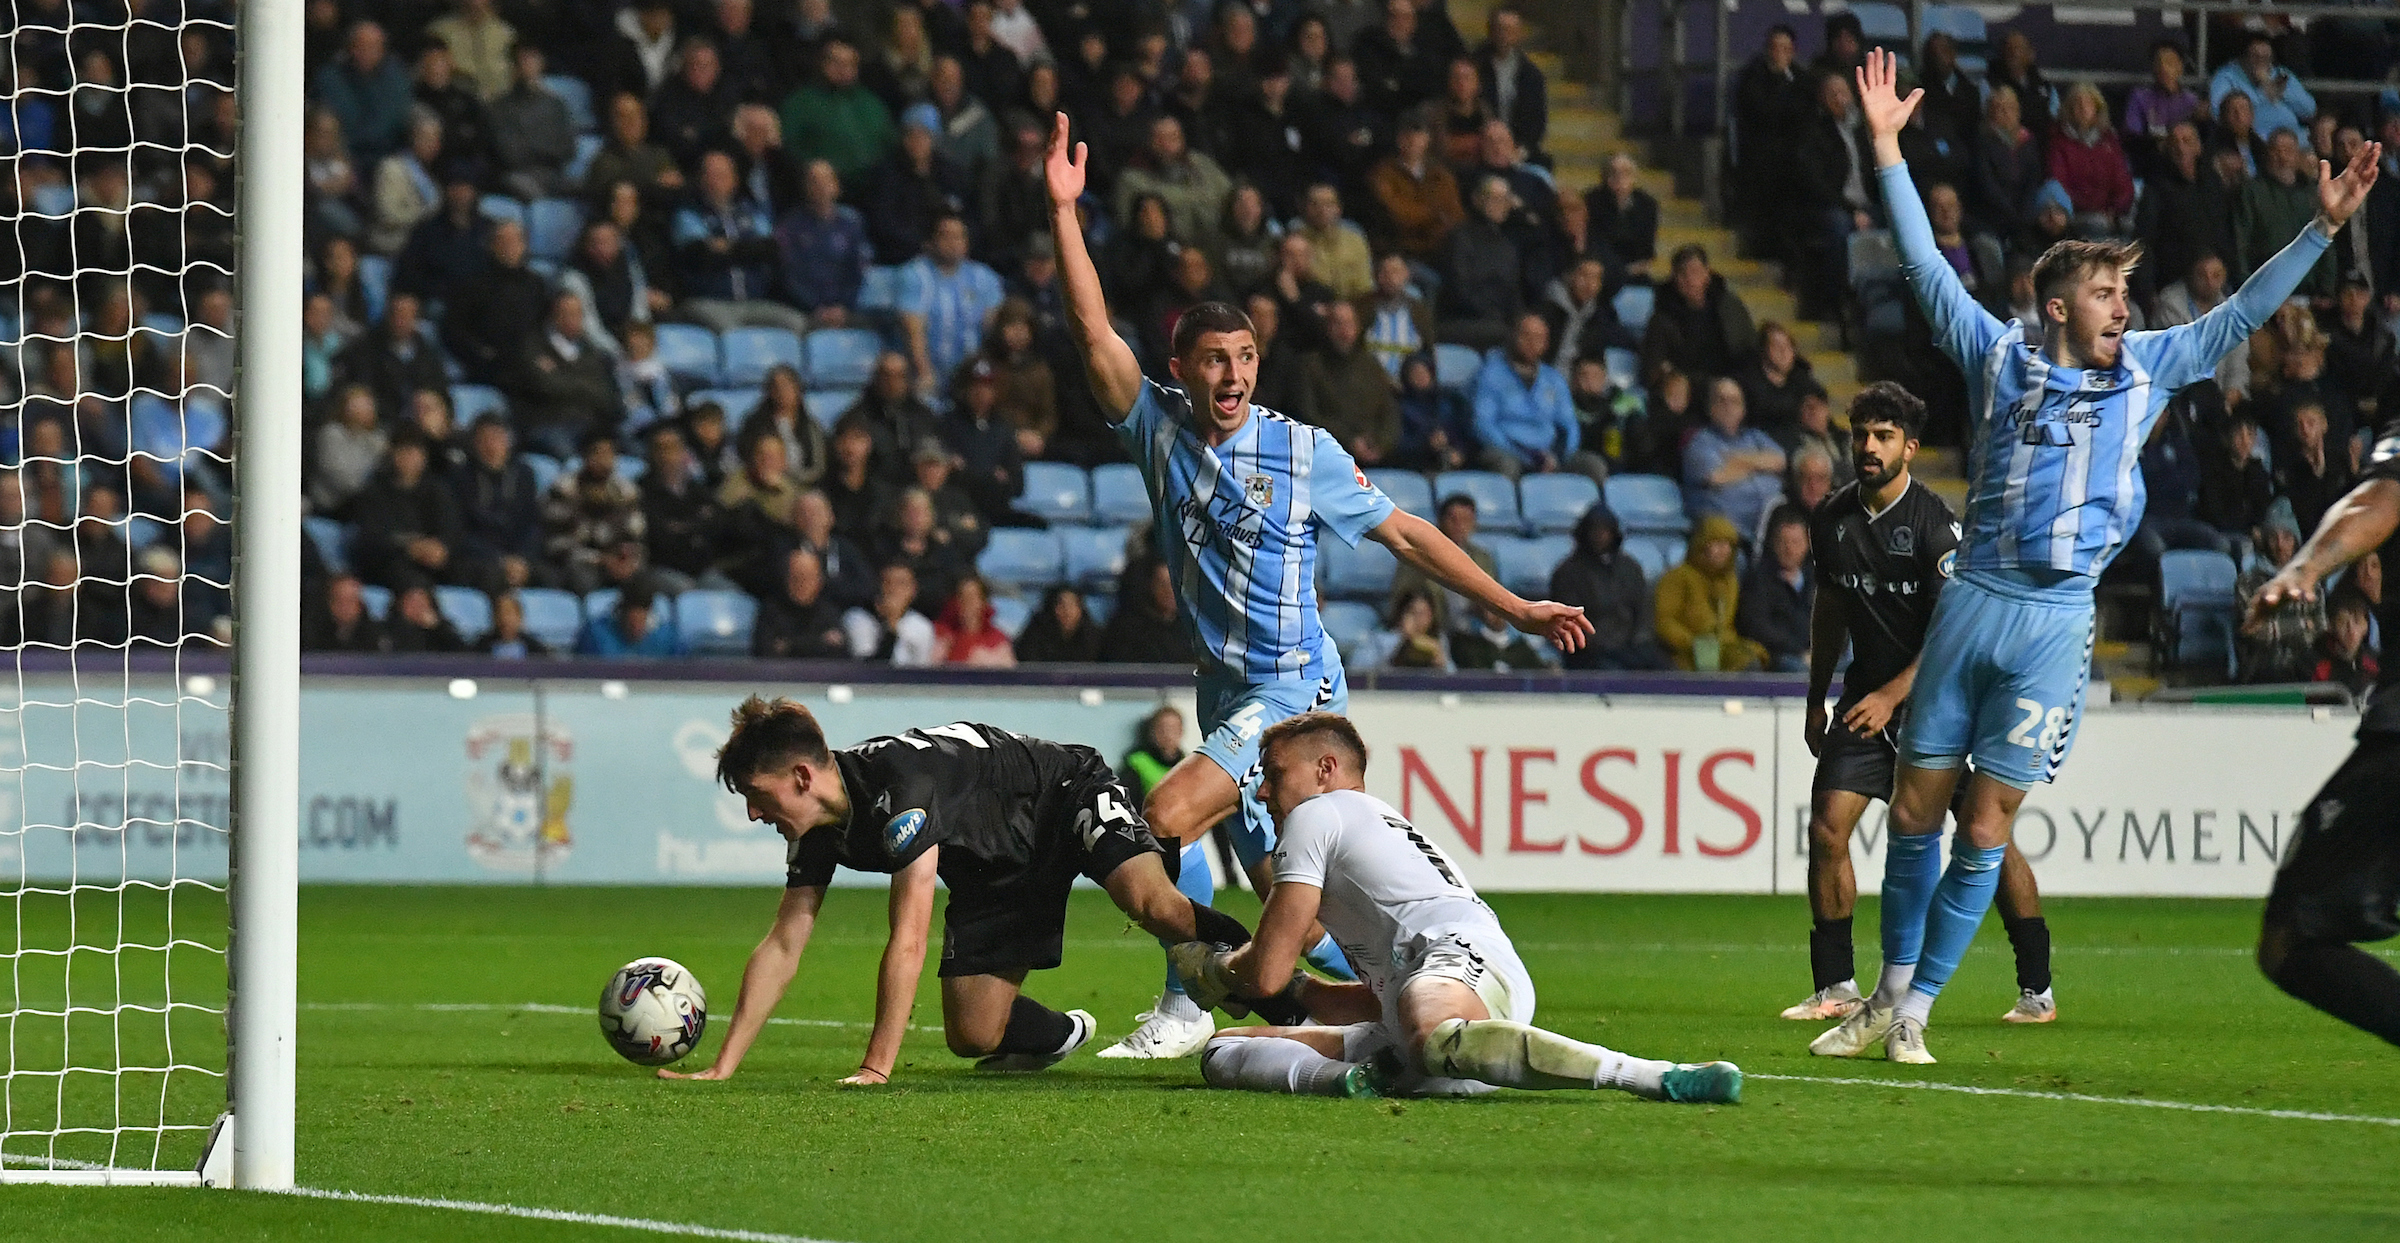 Blackburn Rovers punished at Coventry to inflict another defeat